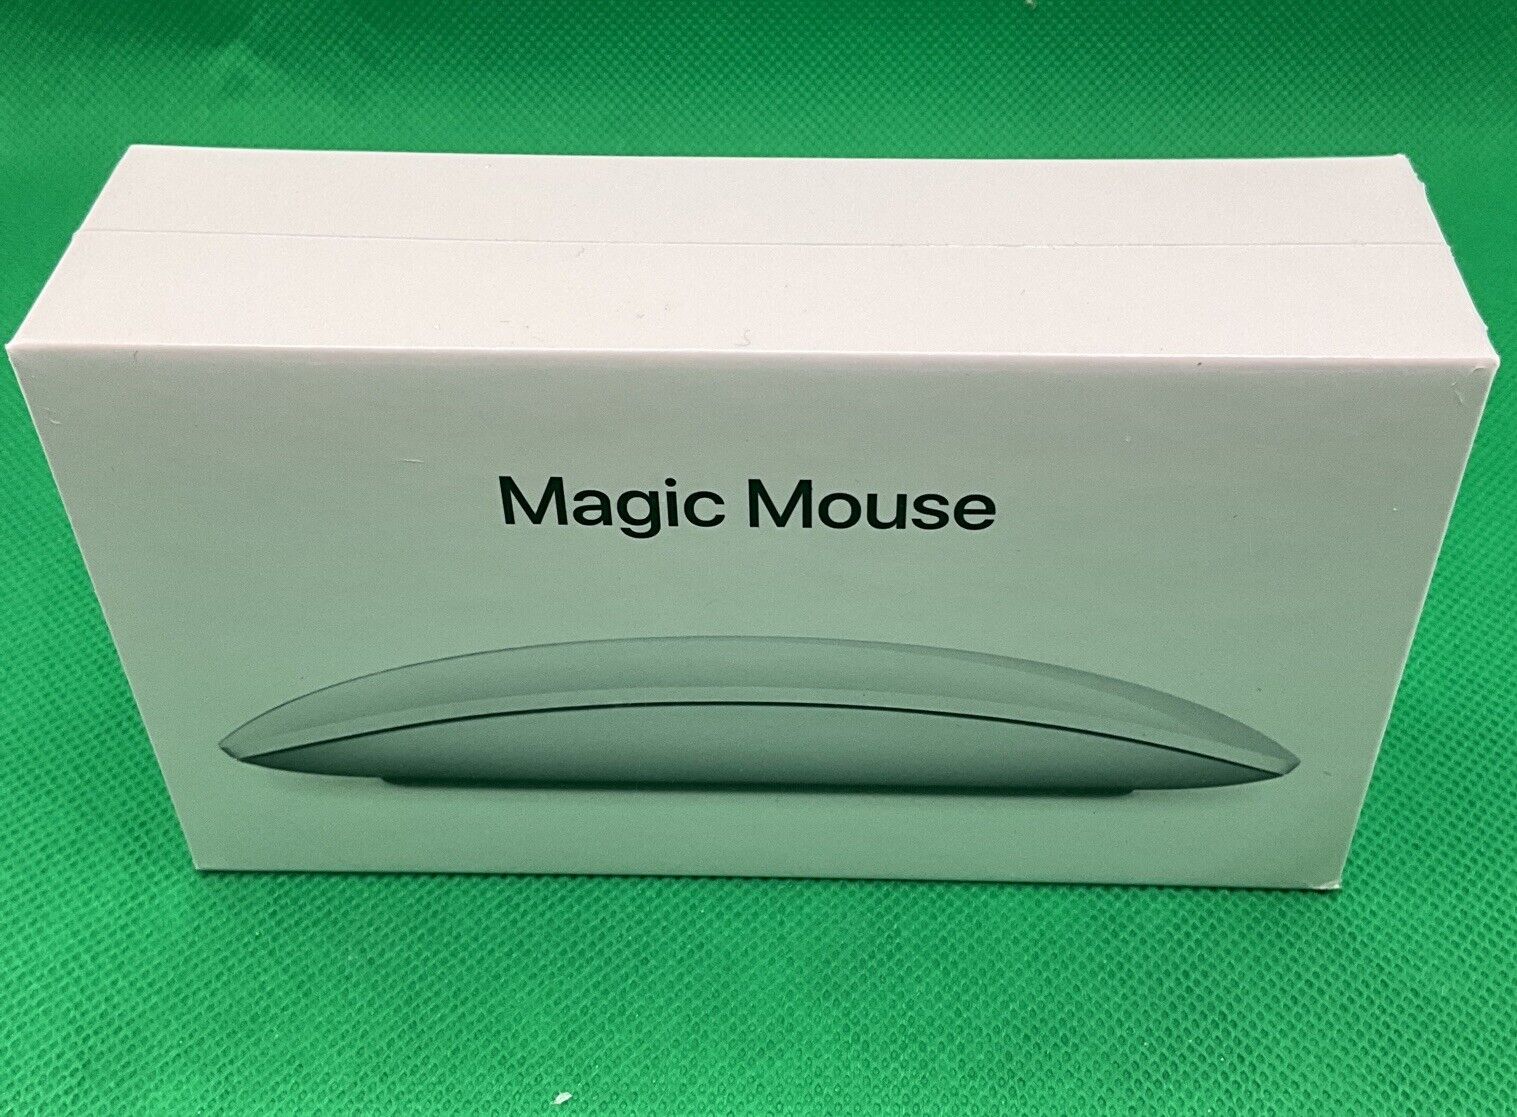 Apple Magic Mouse 2 Wireless Mouse - WHITE (A1657). BRAND NEW SEALED